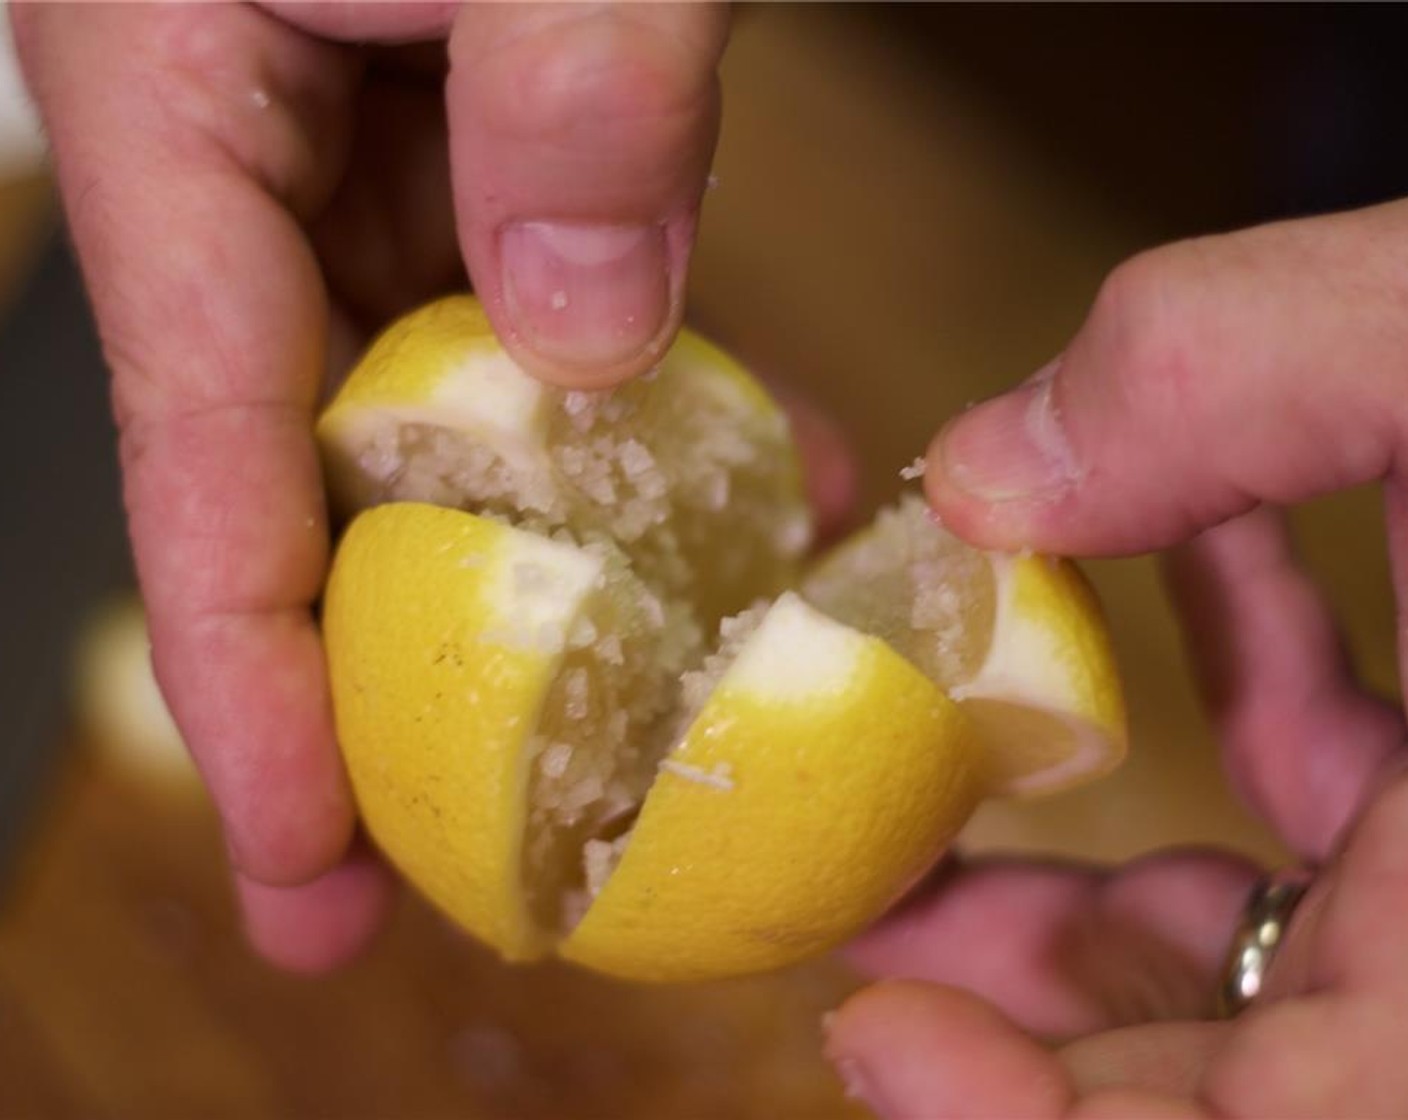 step 2 Slice the lemon into quarters, while making sure to keep it whole. Season the inside heavily with Kosher Salt (to taste).